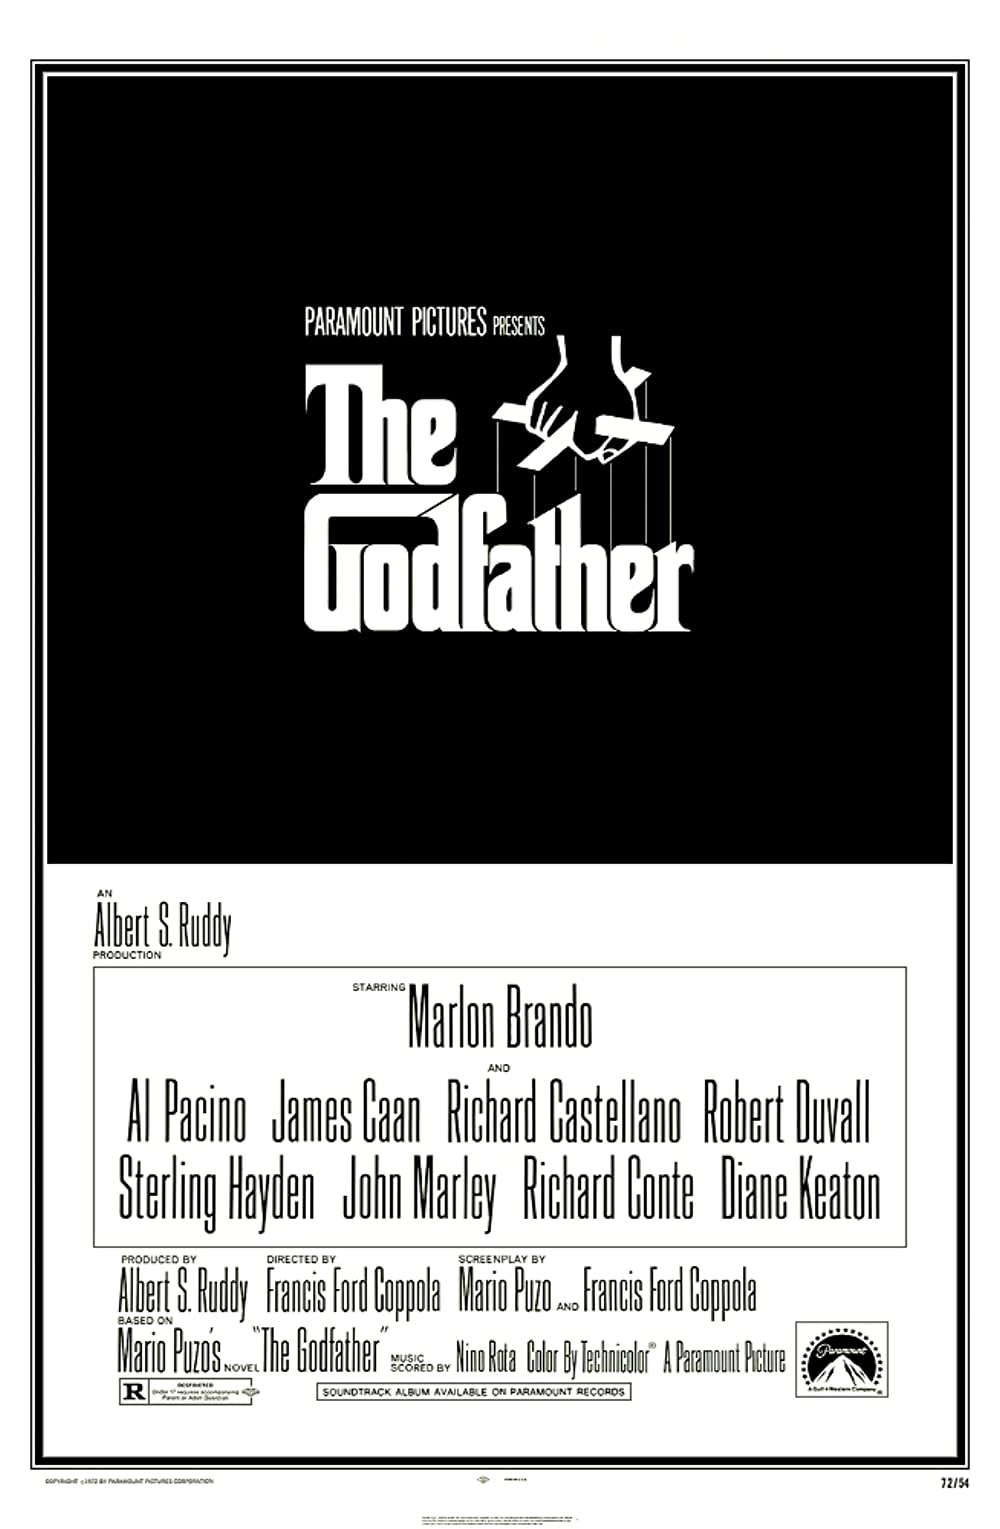 Summer Arts Festival Presents – “The Godfather”